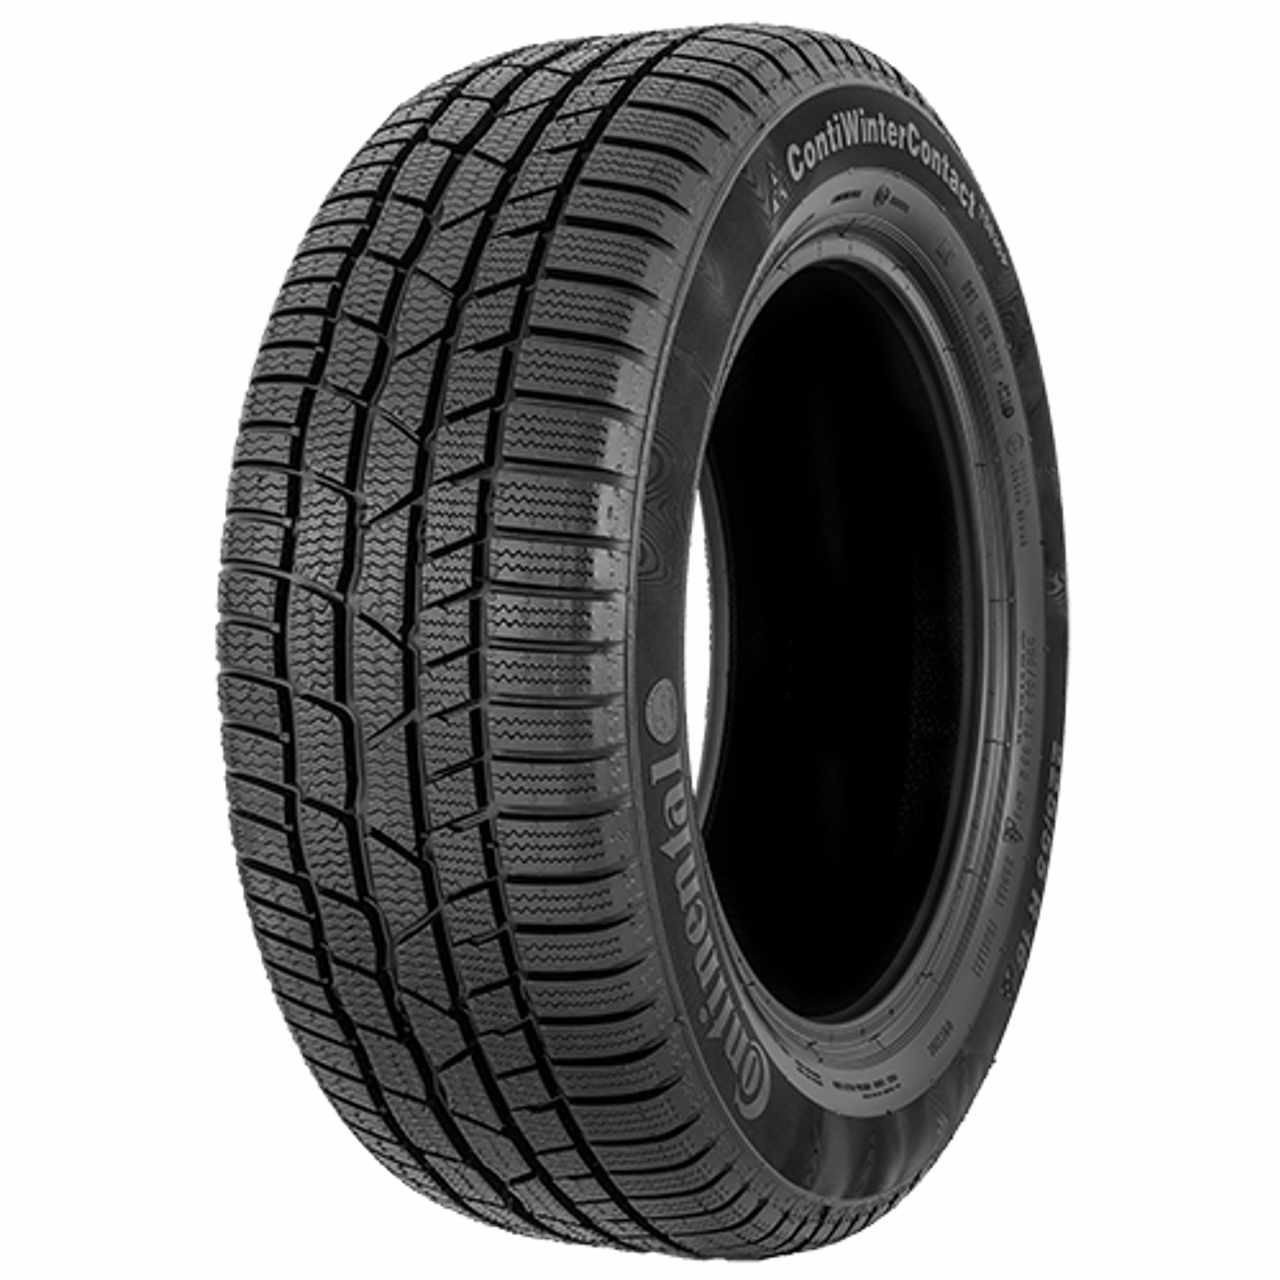 CONTINENTAL CONTIWINTERCONTACT TS 830 P (*) 195/55R16 87H 